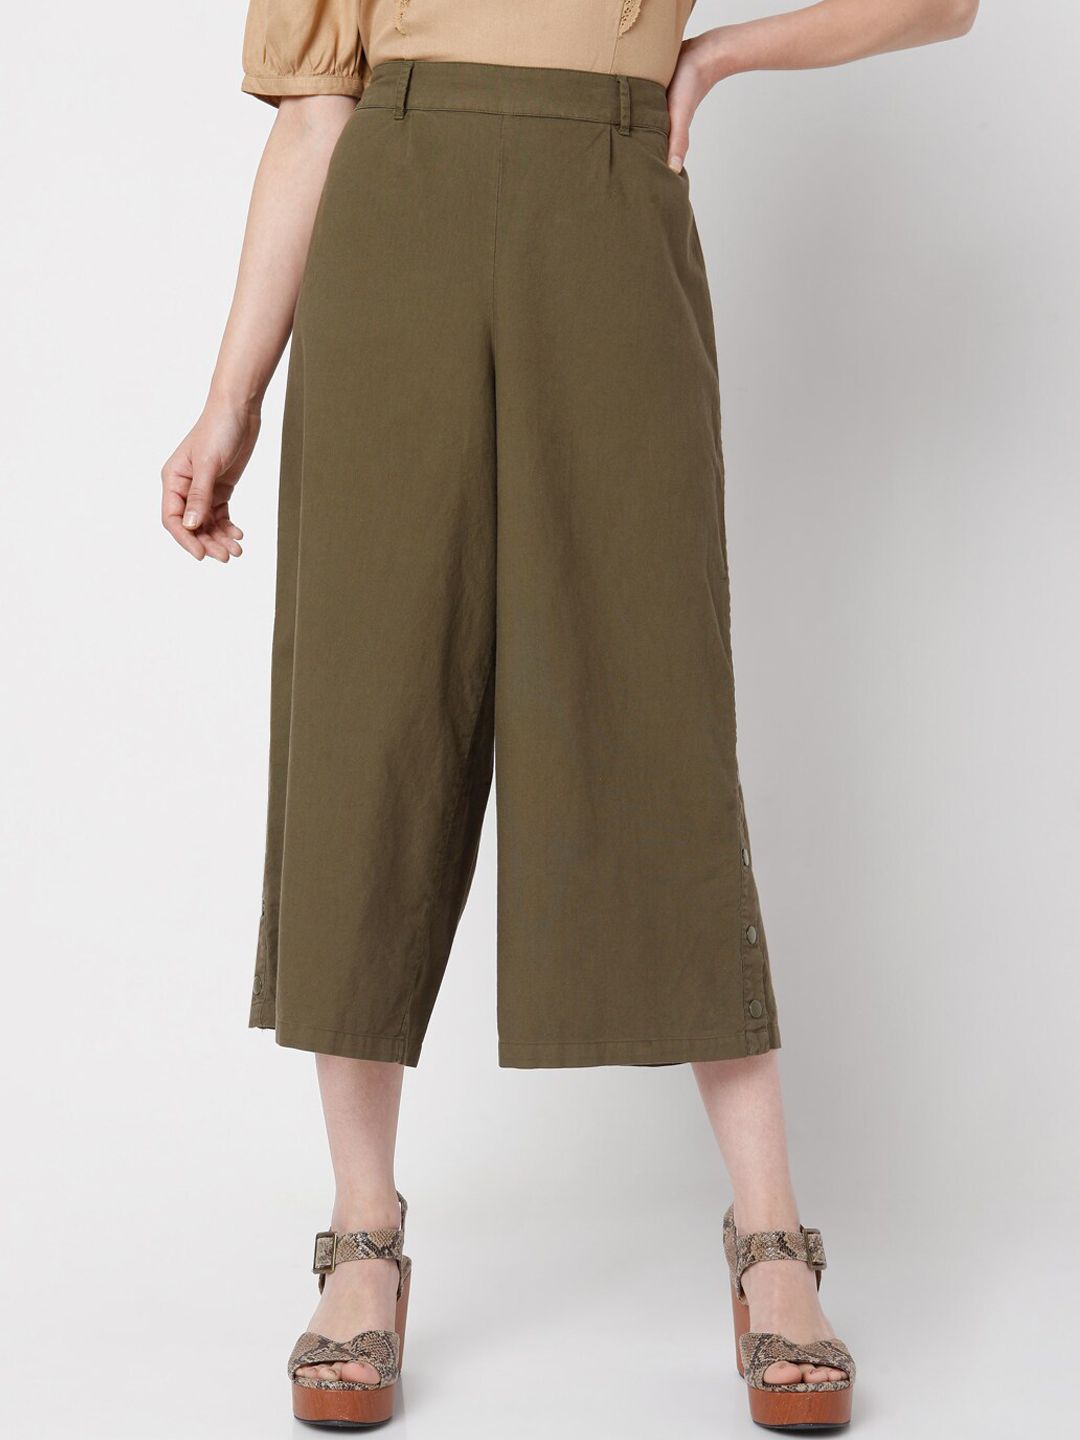 Vero Moda Women Olive Green Flared High-Rise Culottes Trousers Price in India